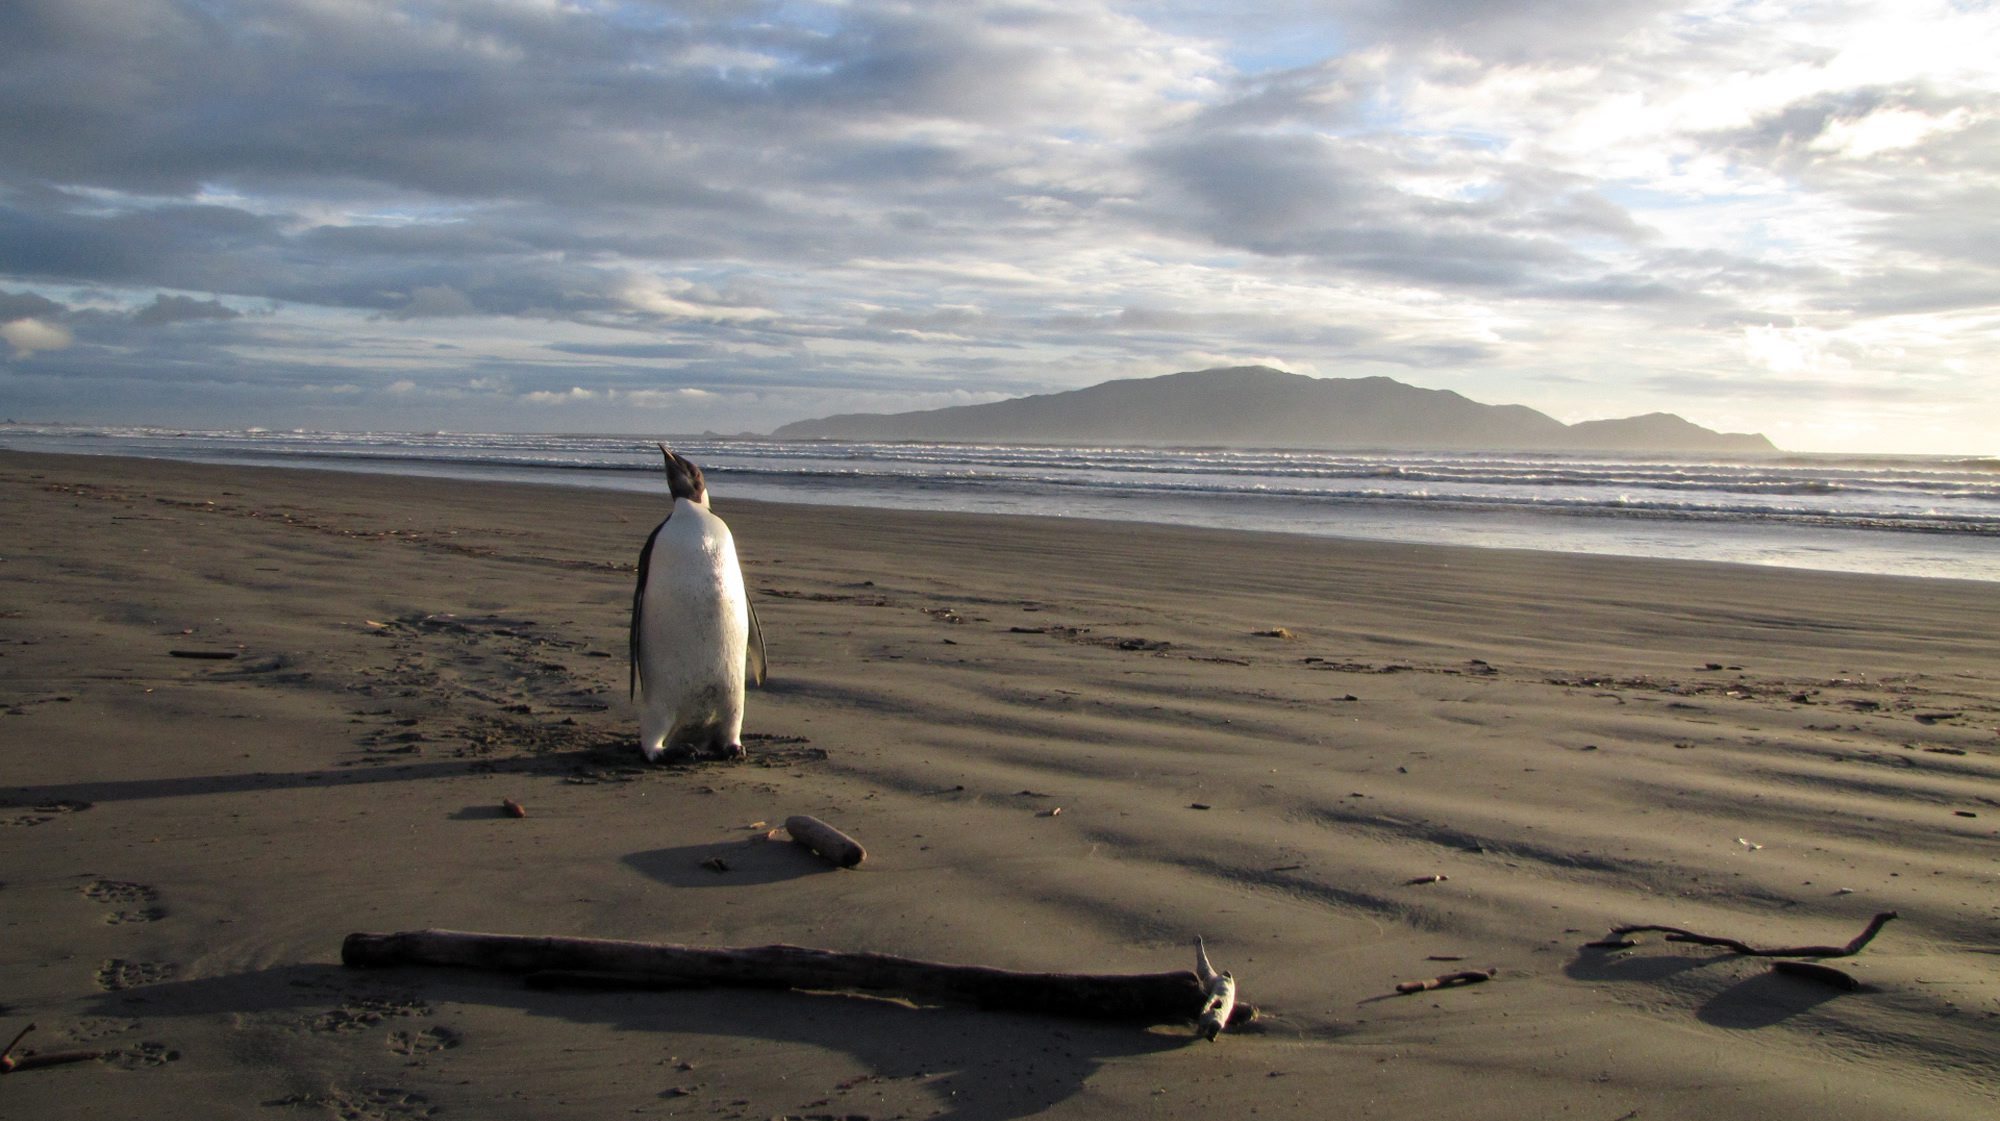 epa02787759 A supplied image by the Department of Conservation shows an Emperor penguin walking along Peka Peka Beach in New Zealand after it got lost while hunting for food, Monday, June 20, 2011. The first emperor penguin in more than 40 years
was spotted in New Zealand after travelling from Antarctica, conservation officials said 21 June 2011. The juvenile emperor penguin, about 1 metre tall, was seen on the Kapiti Coast on the south of the North Island, at least 3,000
kilometres from its home. Only one other sighting of an emperor penguin has been recorded in New Zealand, in 1967 on the far southern coast of the South Island.  EPA/RICHARD GILL / DEPARTMENT OF CONSERVATION AUSTRALIA AND NEW ZEALAND OUT HANDOUT EDITORIAL USE ONLY/NO SALES